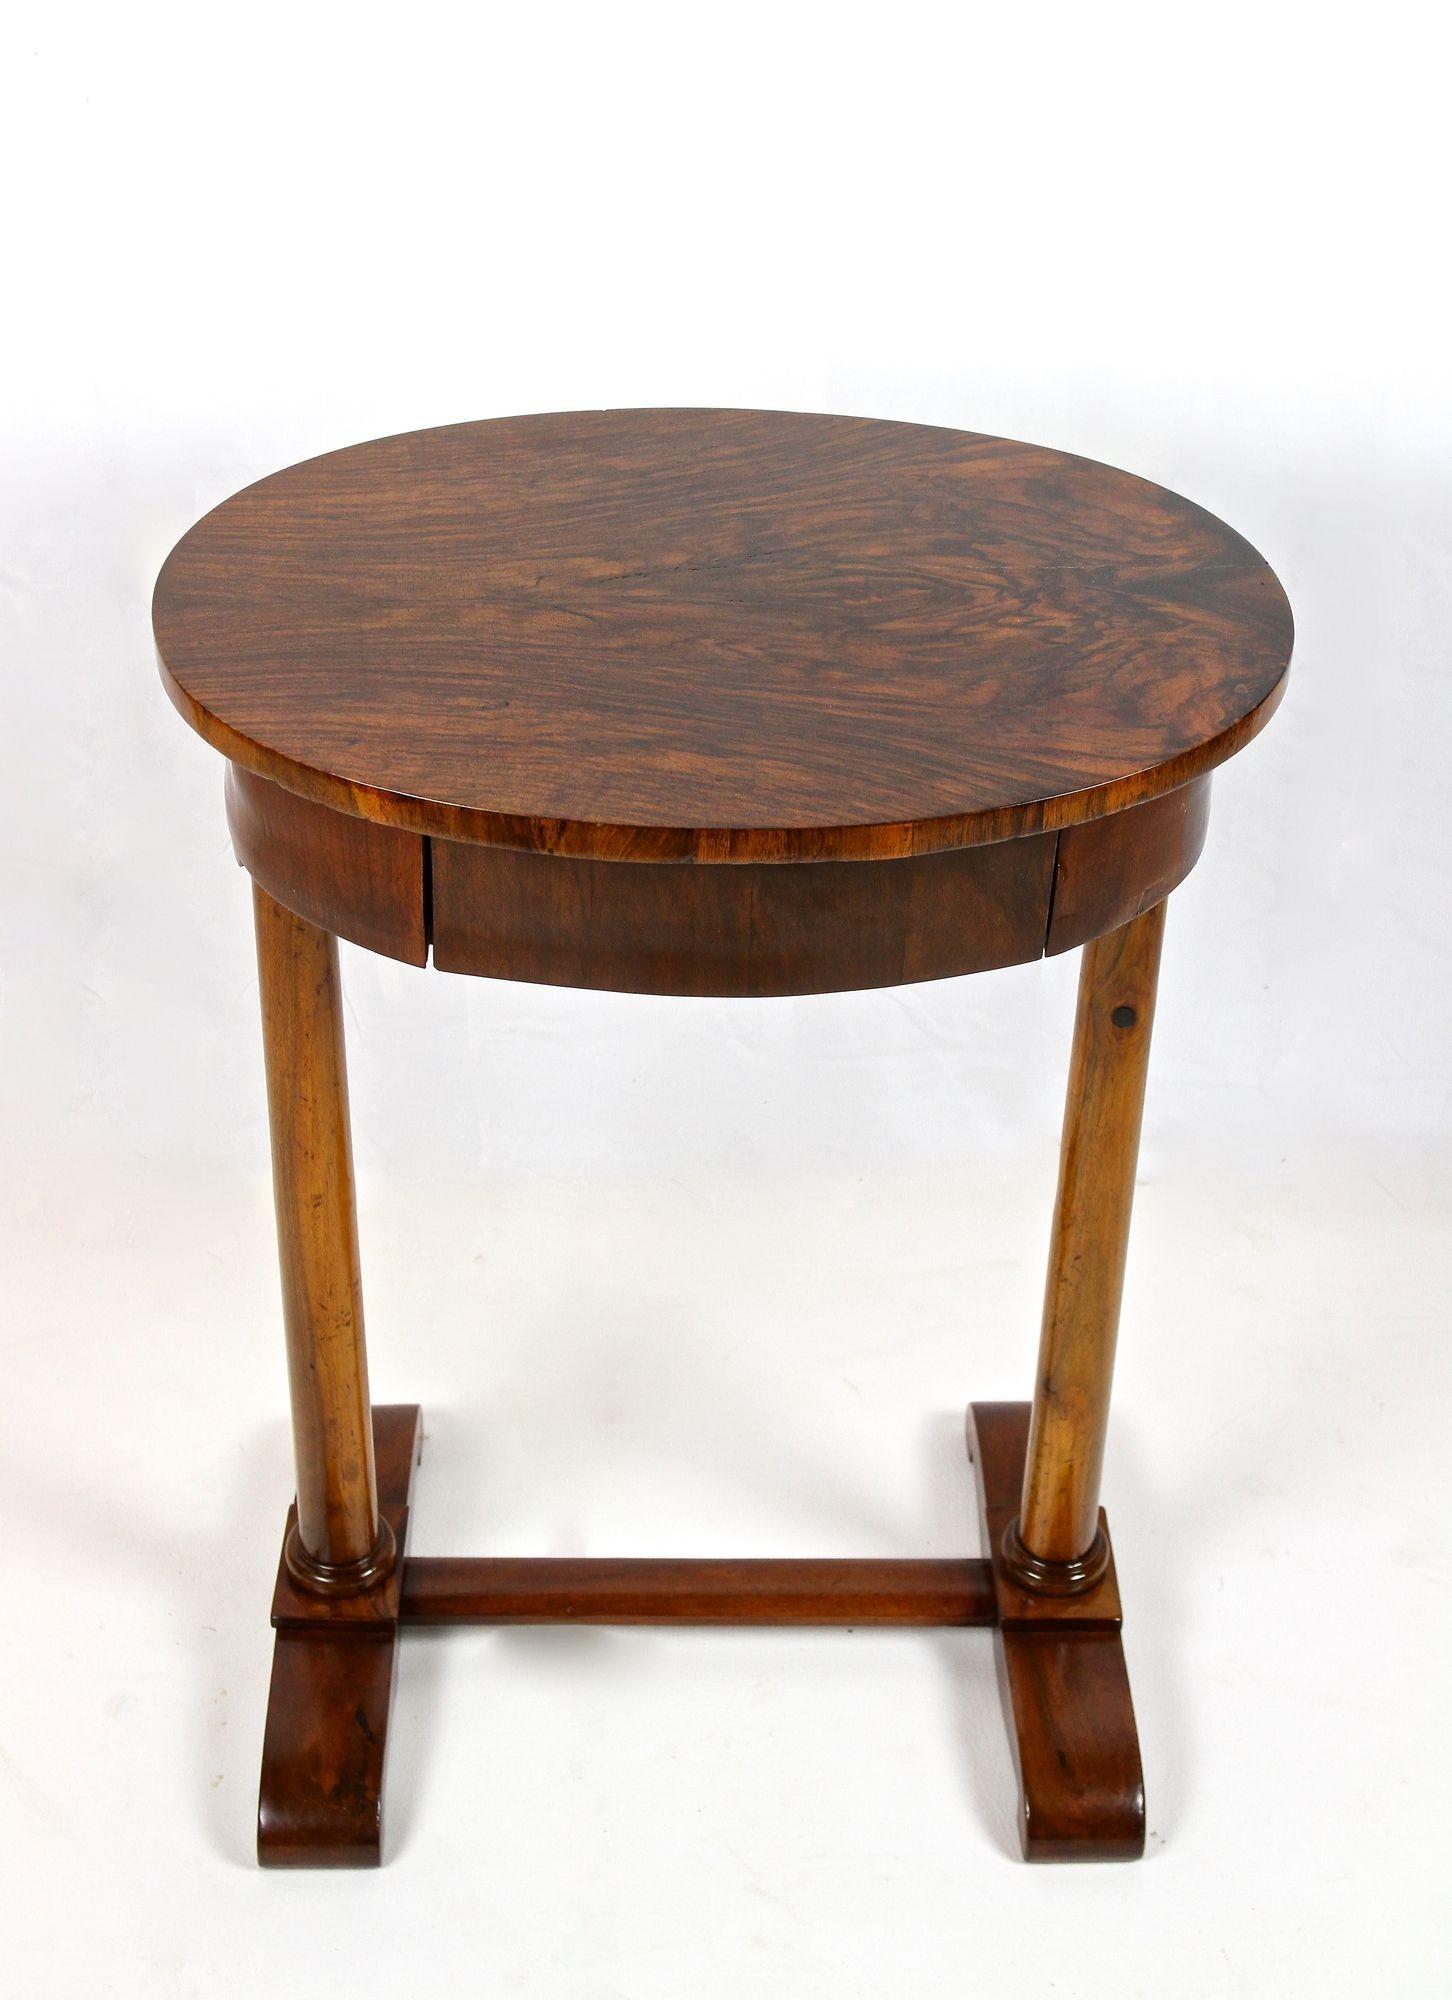 Charming oval 19th century nutwood side table coming from the famous Biedermeier period in Austria around 1830. With an age of over 190 years this charming nutwood side table is still an eye-catcher and provides a small center drawer, divided into